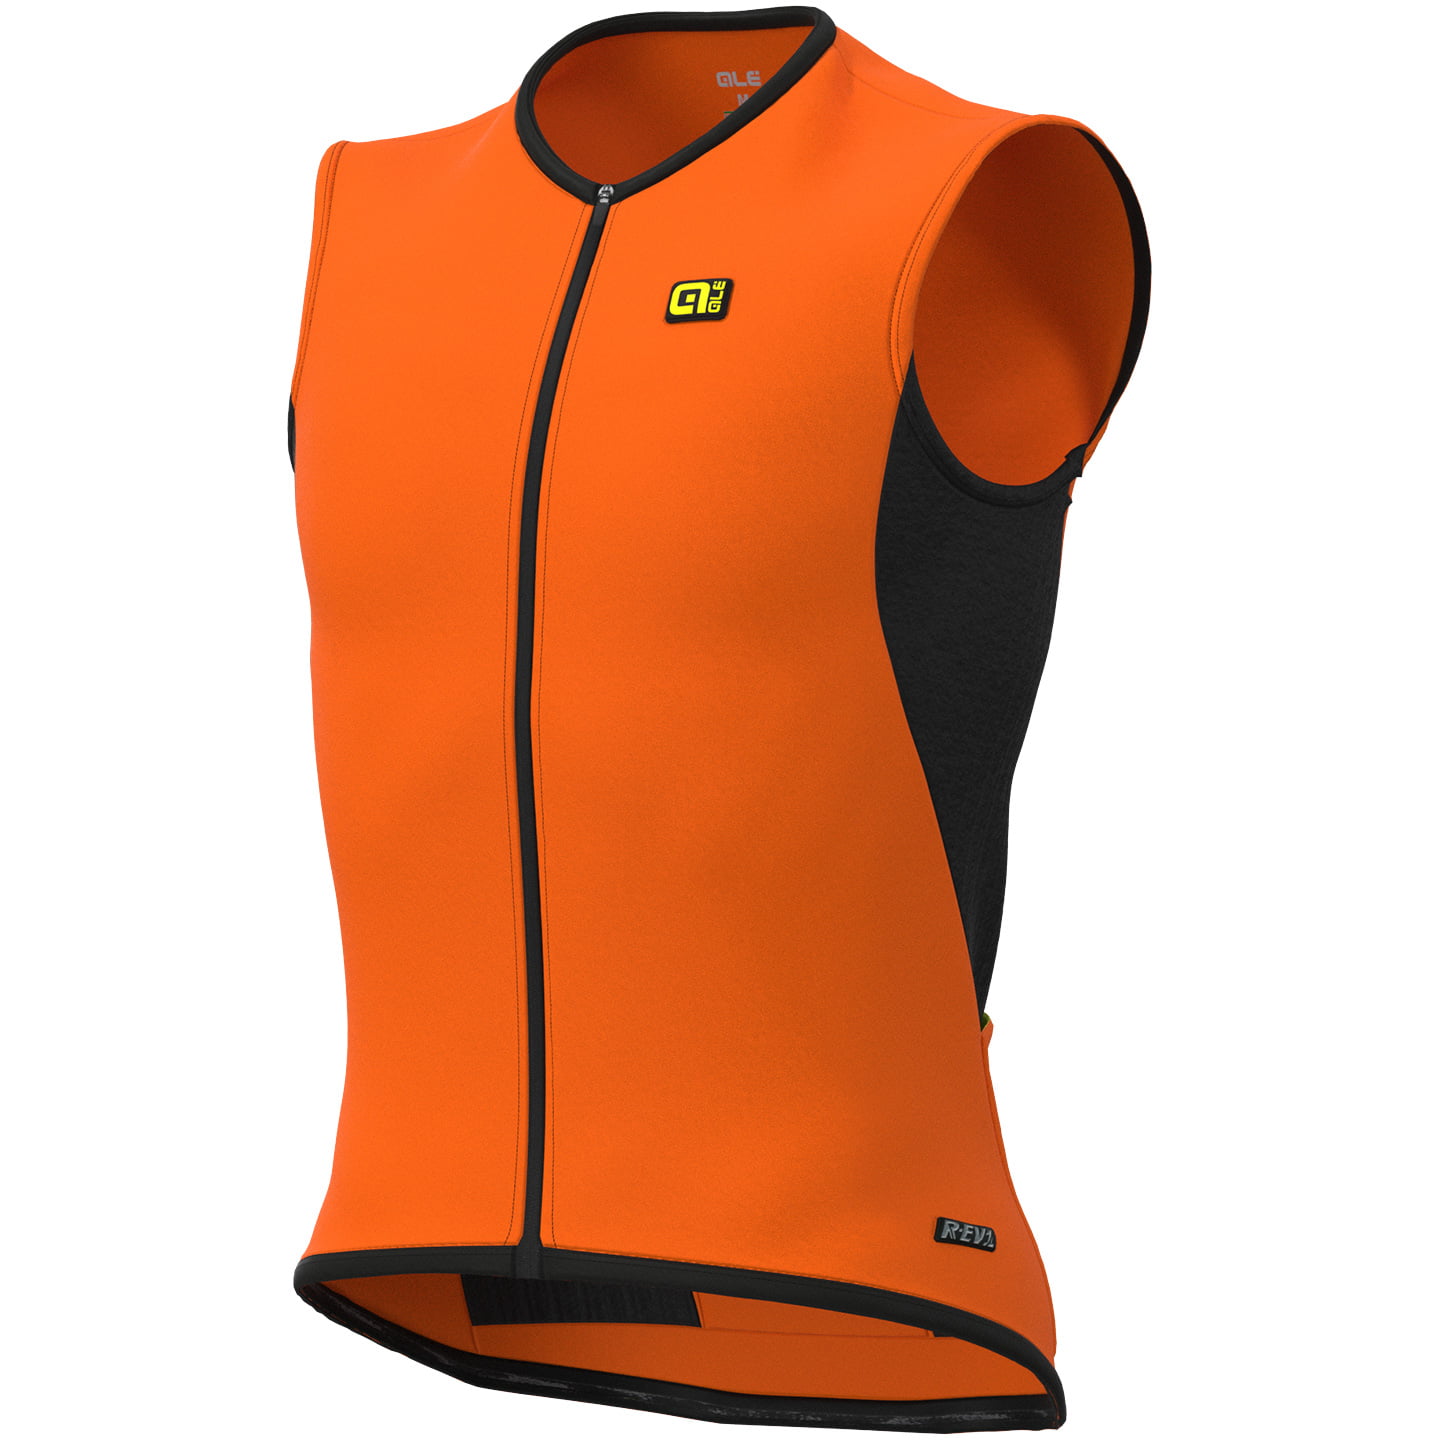 ALE Thermal Vest, for men, size 2XL, Cycling vest, Cycling clothing